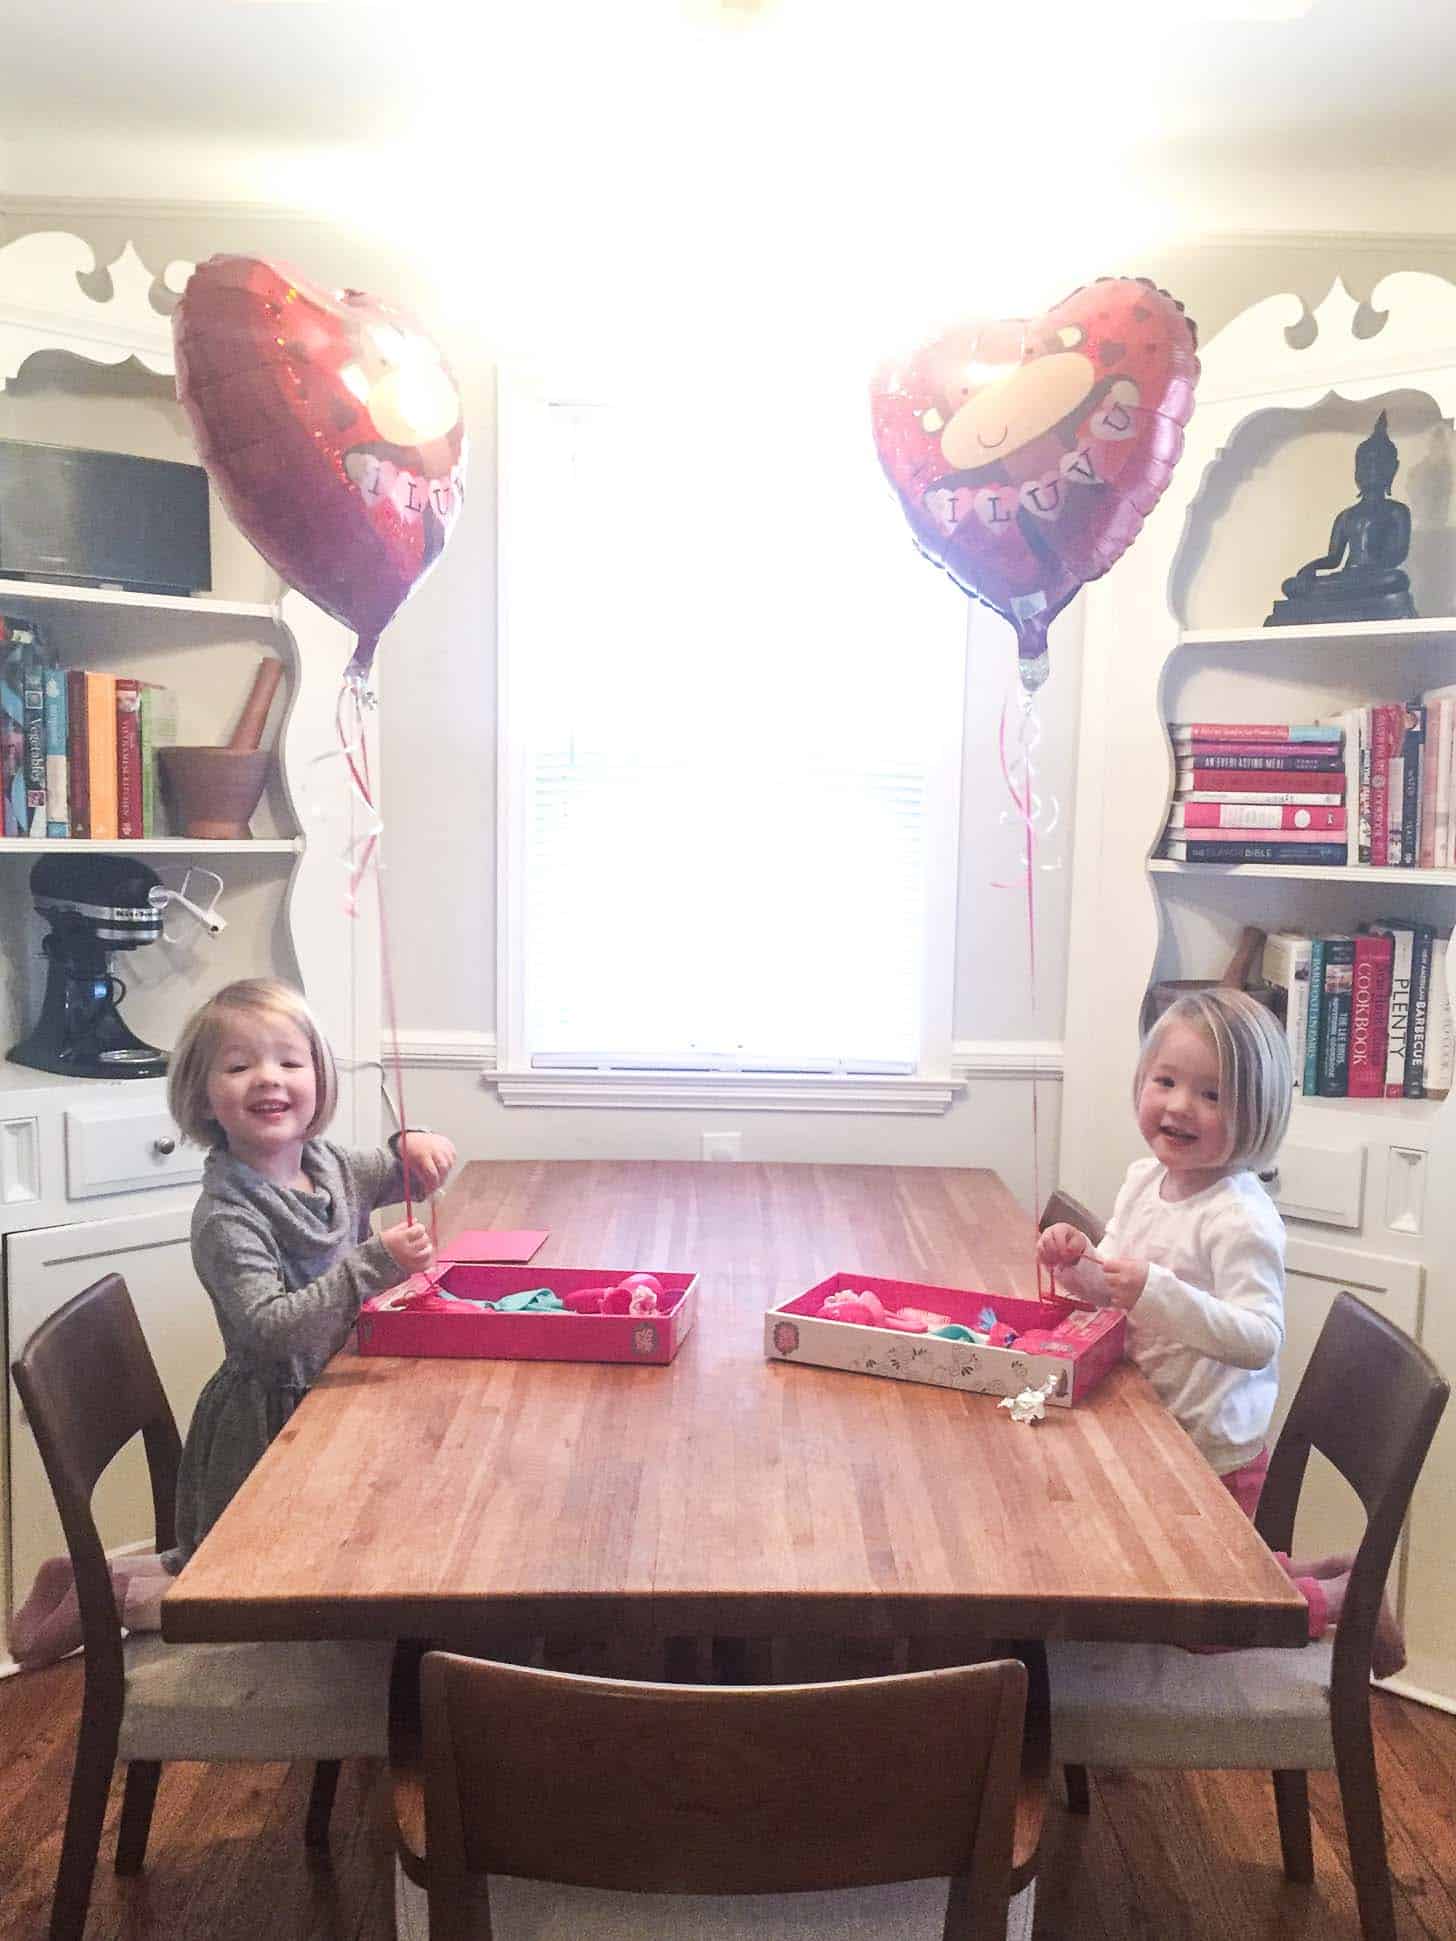 Molly and Clara with valentines and heart balloons